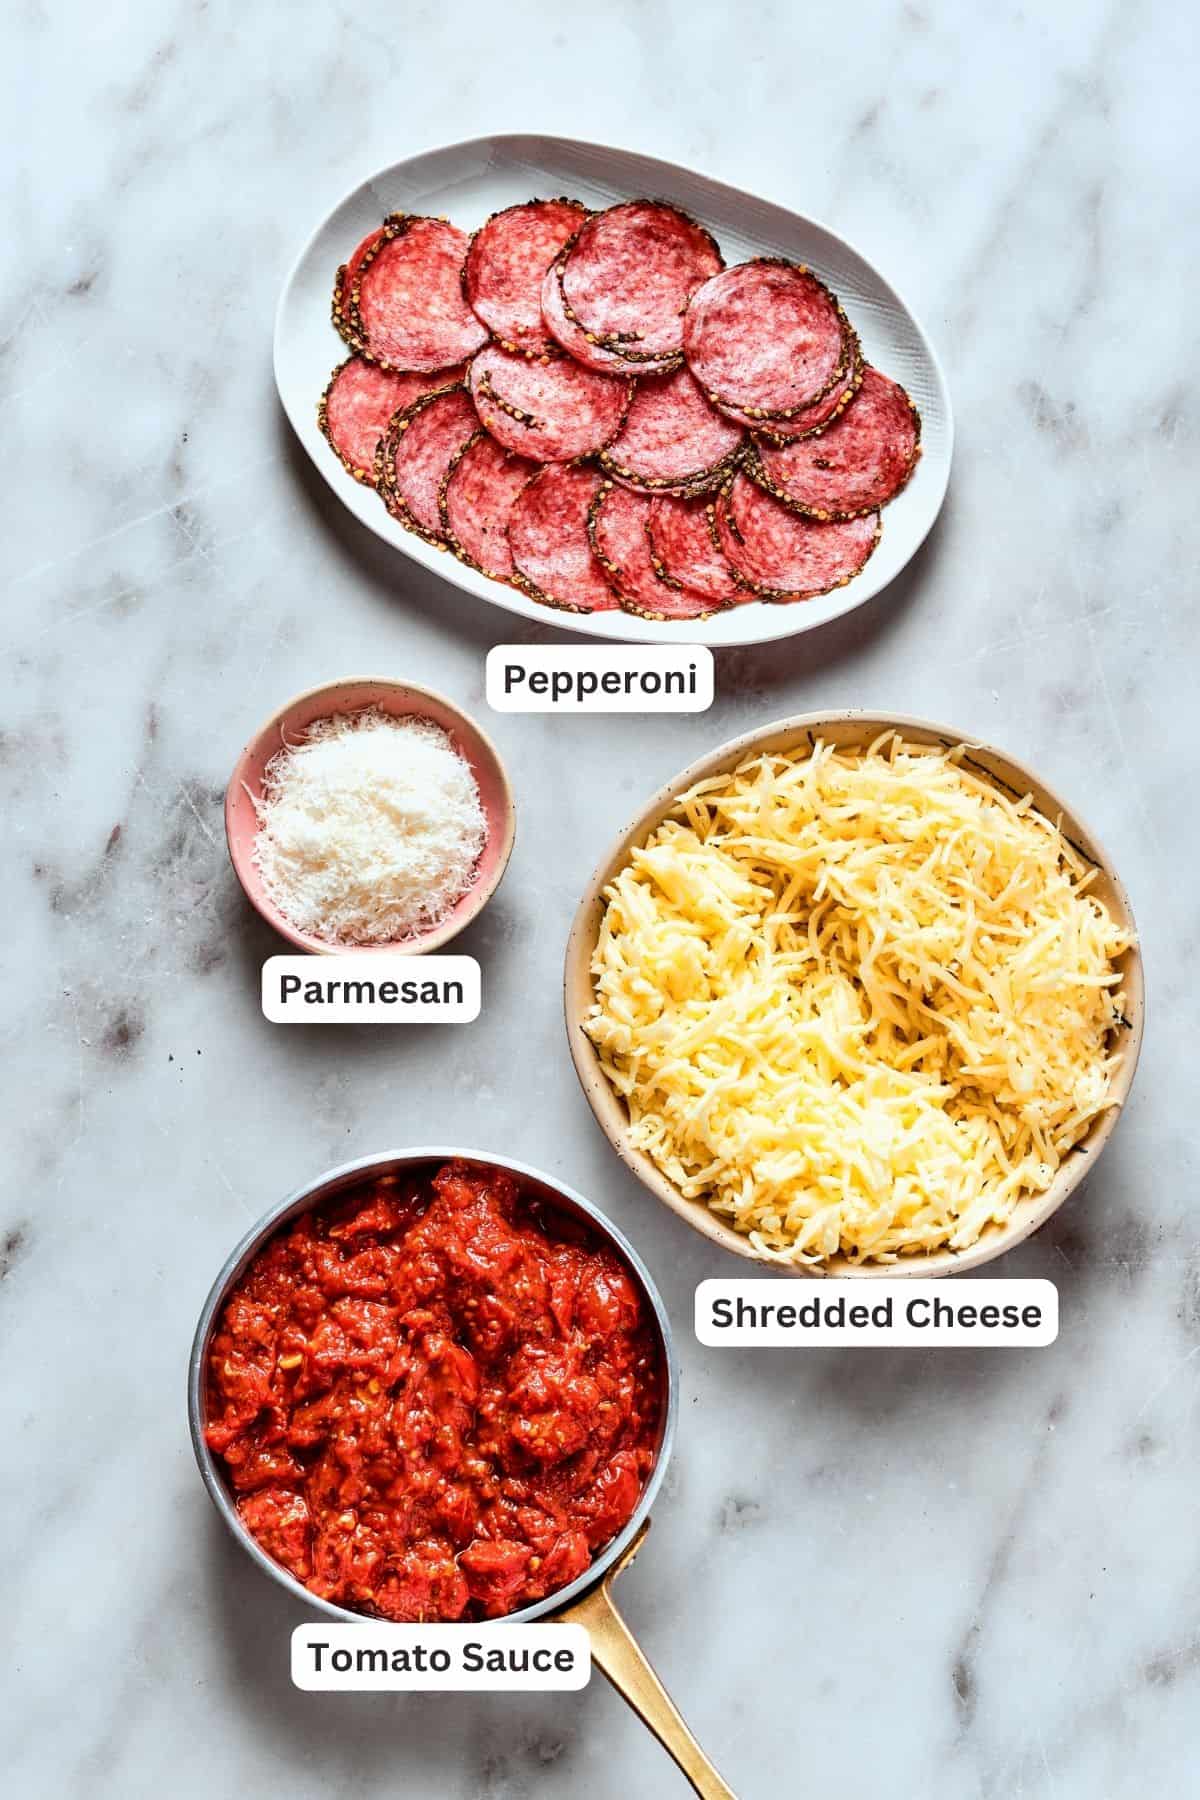 Deep dish pizza toppings: cheese, parmesan, tomato sauce, pepperoni.